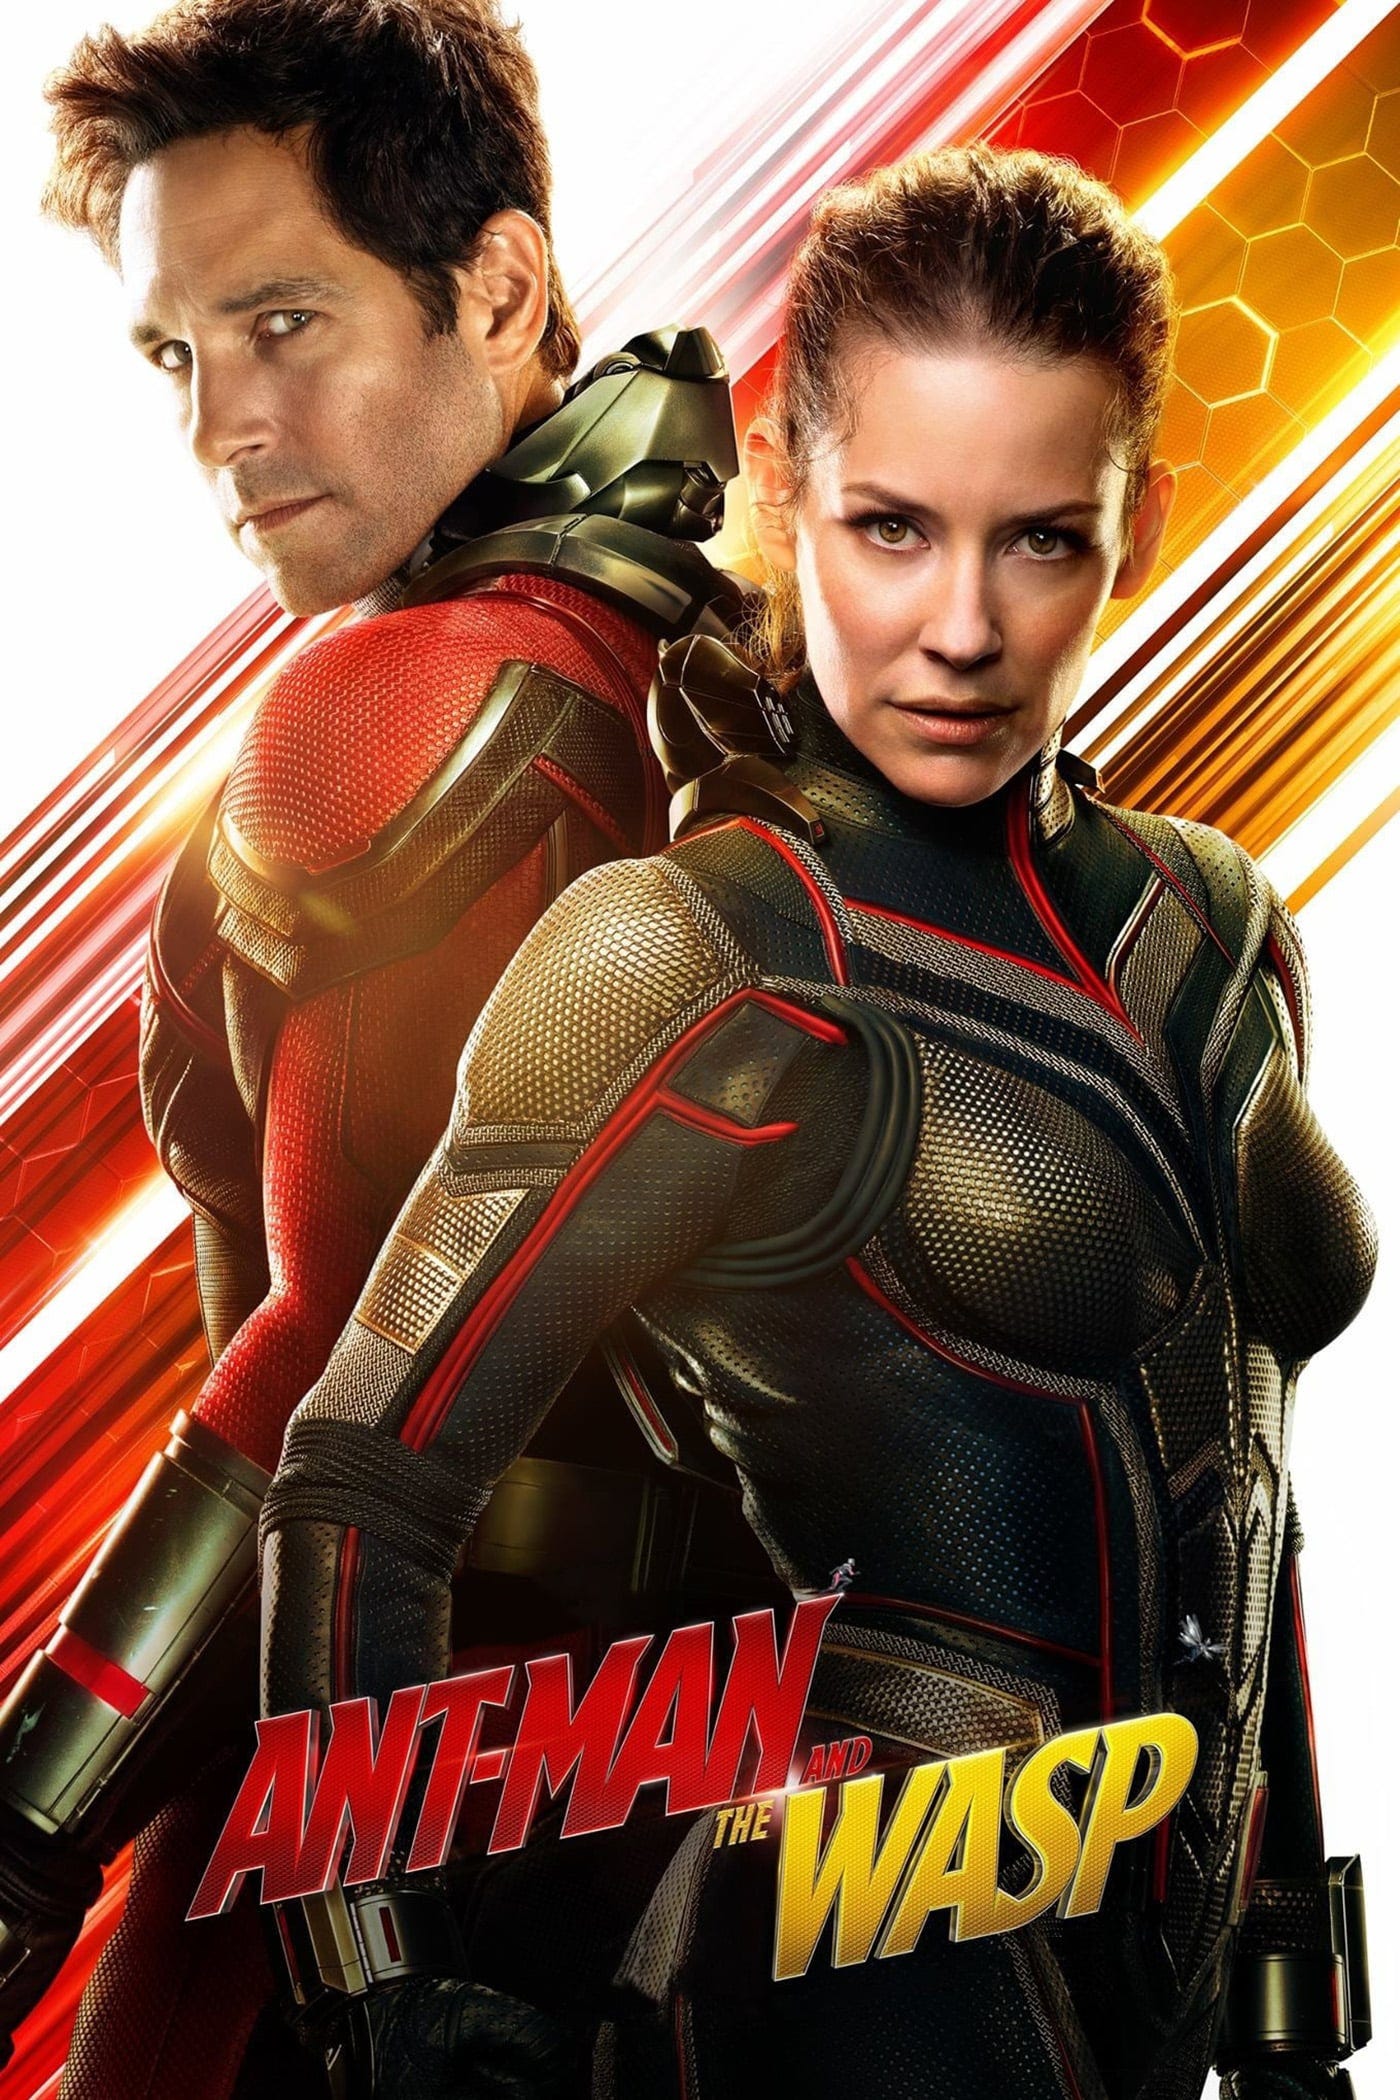 Ant-Man and the Wasp (2018) Hindi Dubbed Movie Download